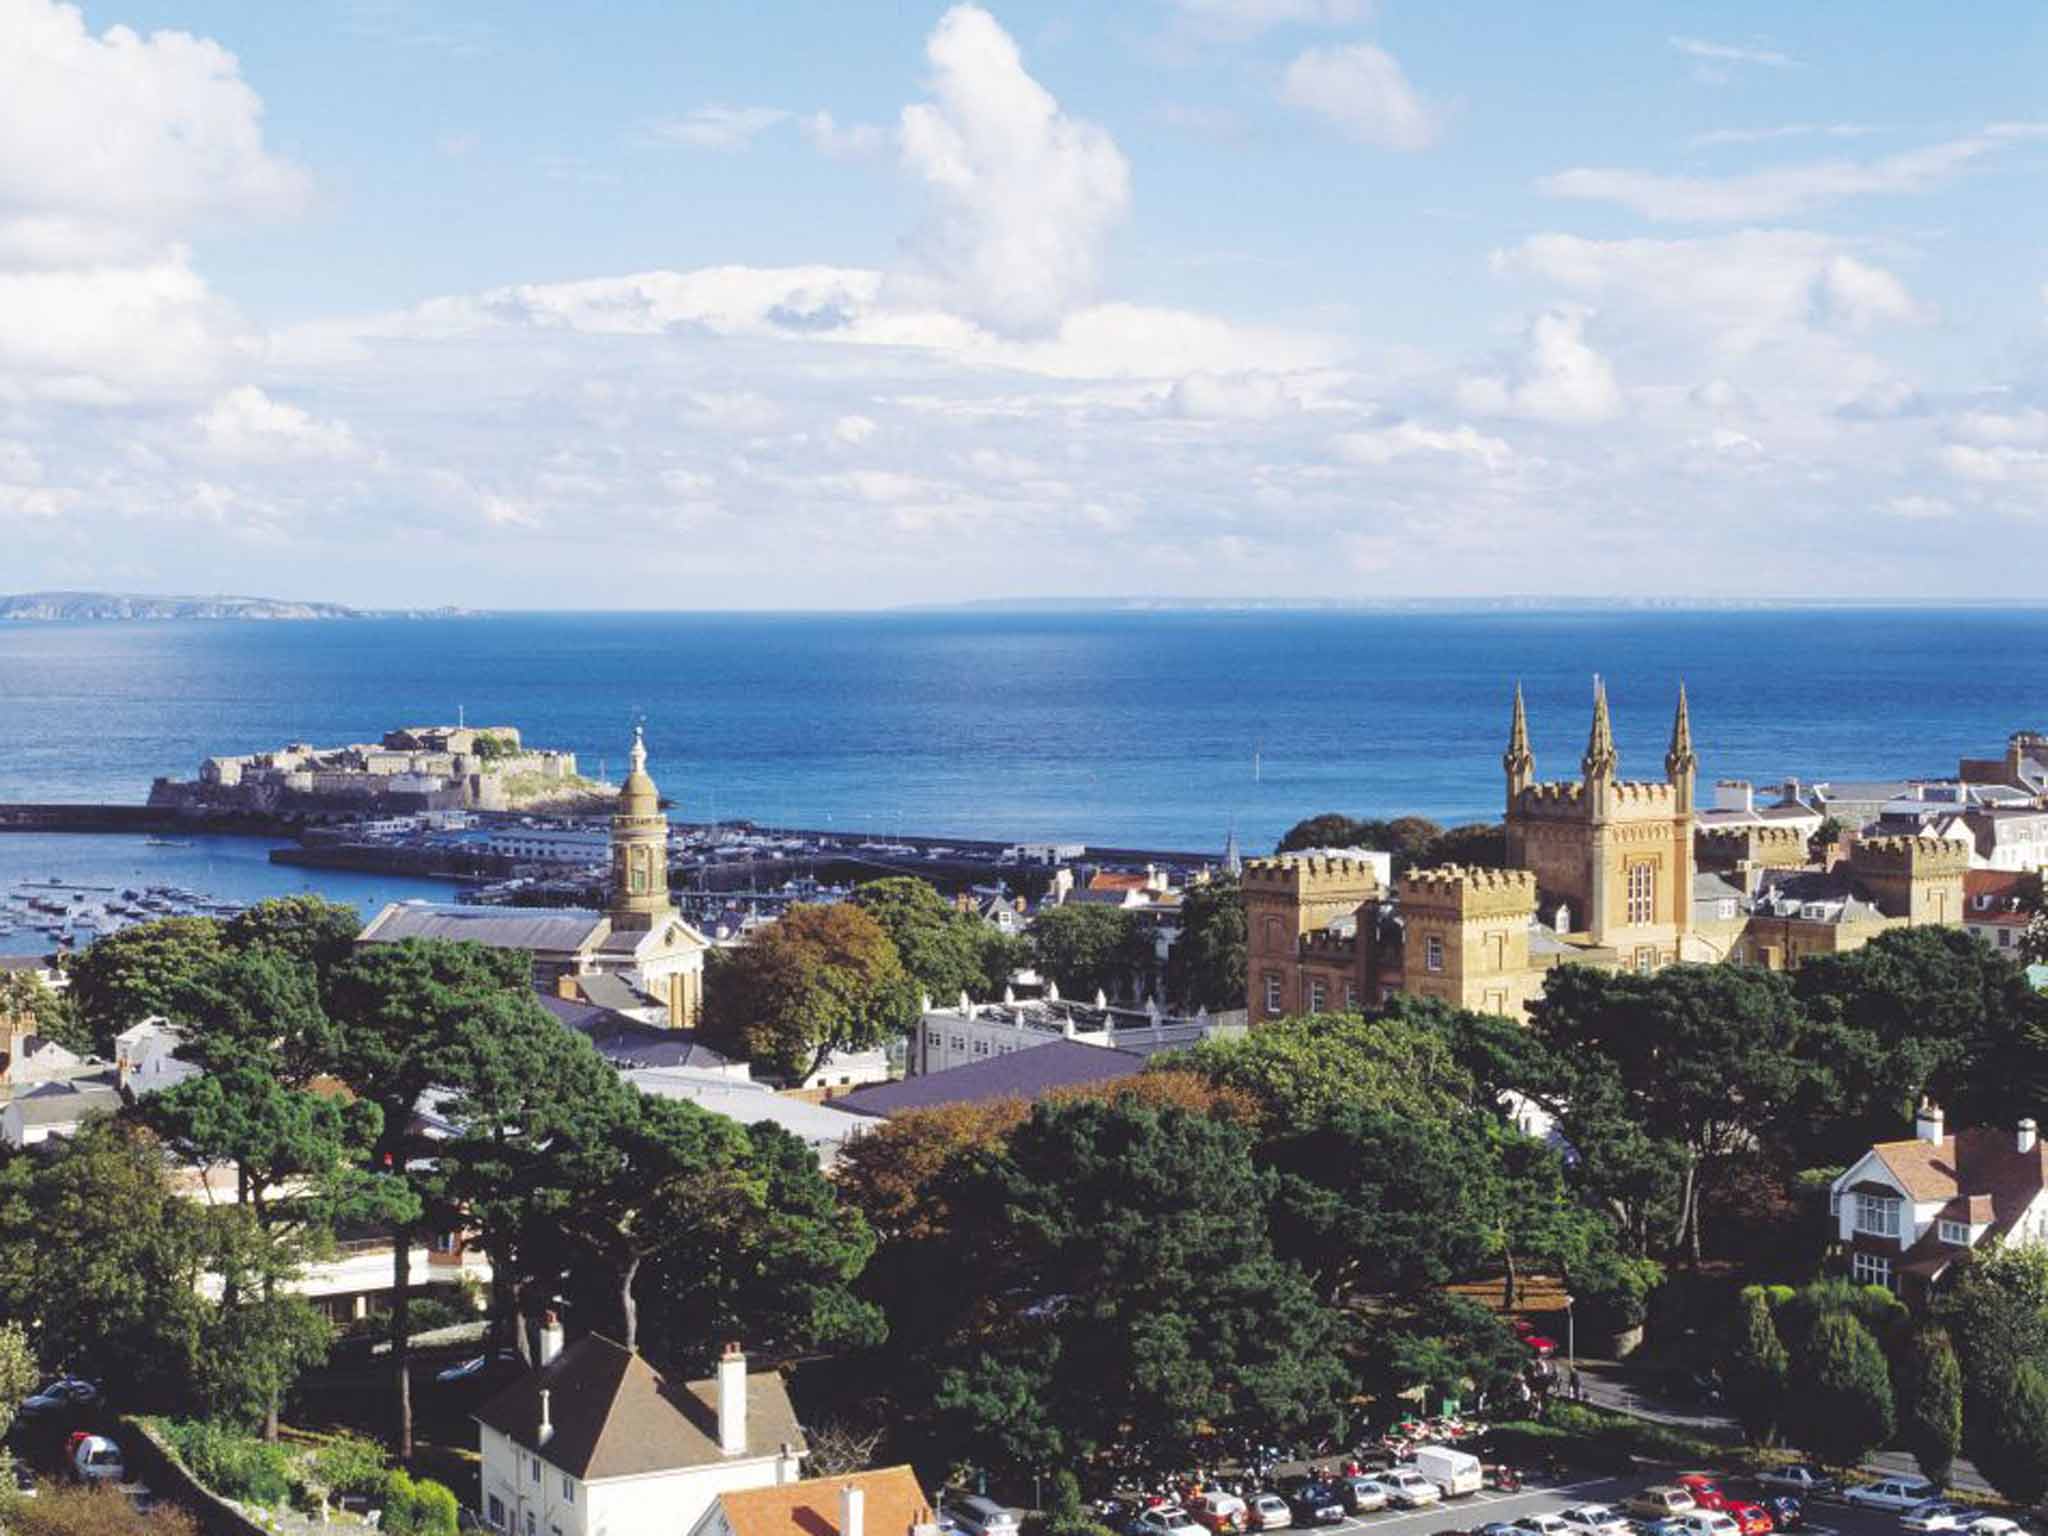 At over £30,000 per capita, Guernsey residents enjoy one of the highest GDPs in the world